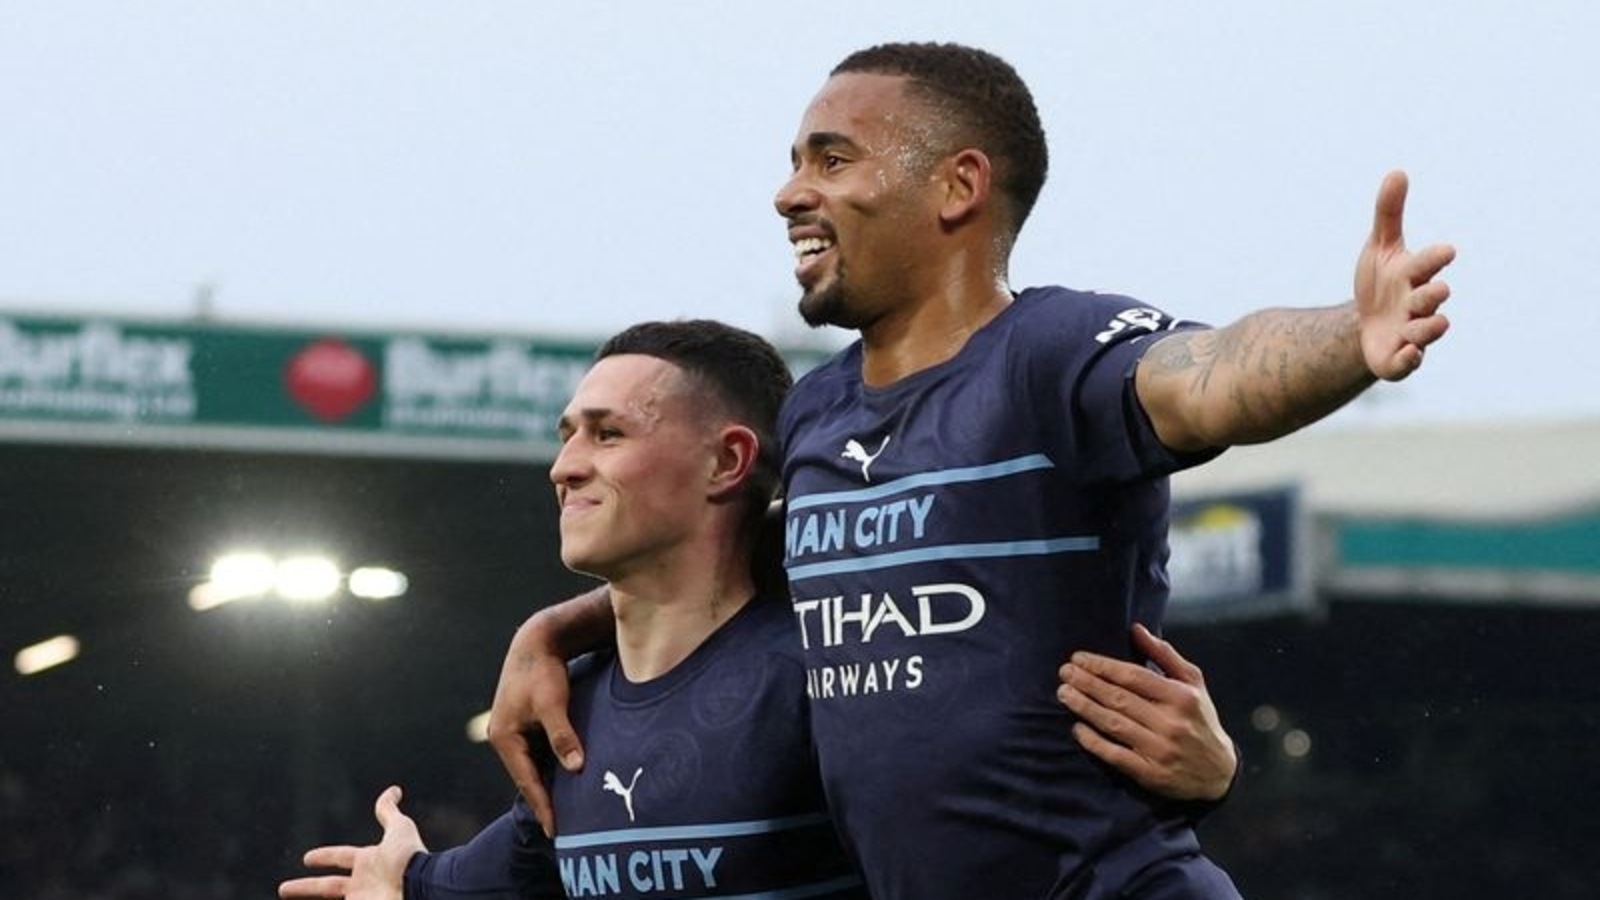 Premier League: Man City and Liverpool keep on winning, Norwich relegated